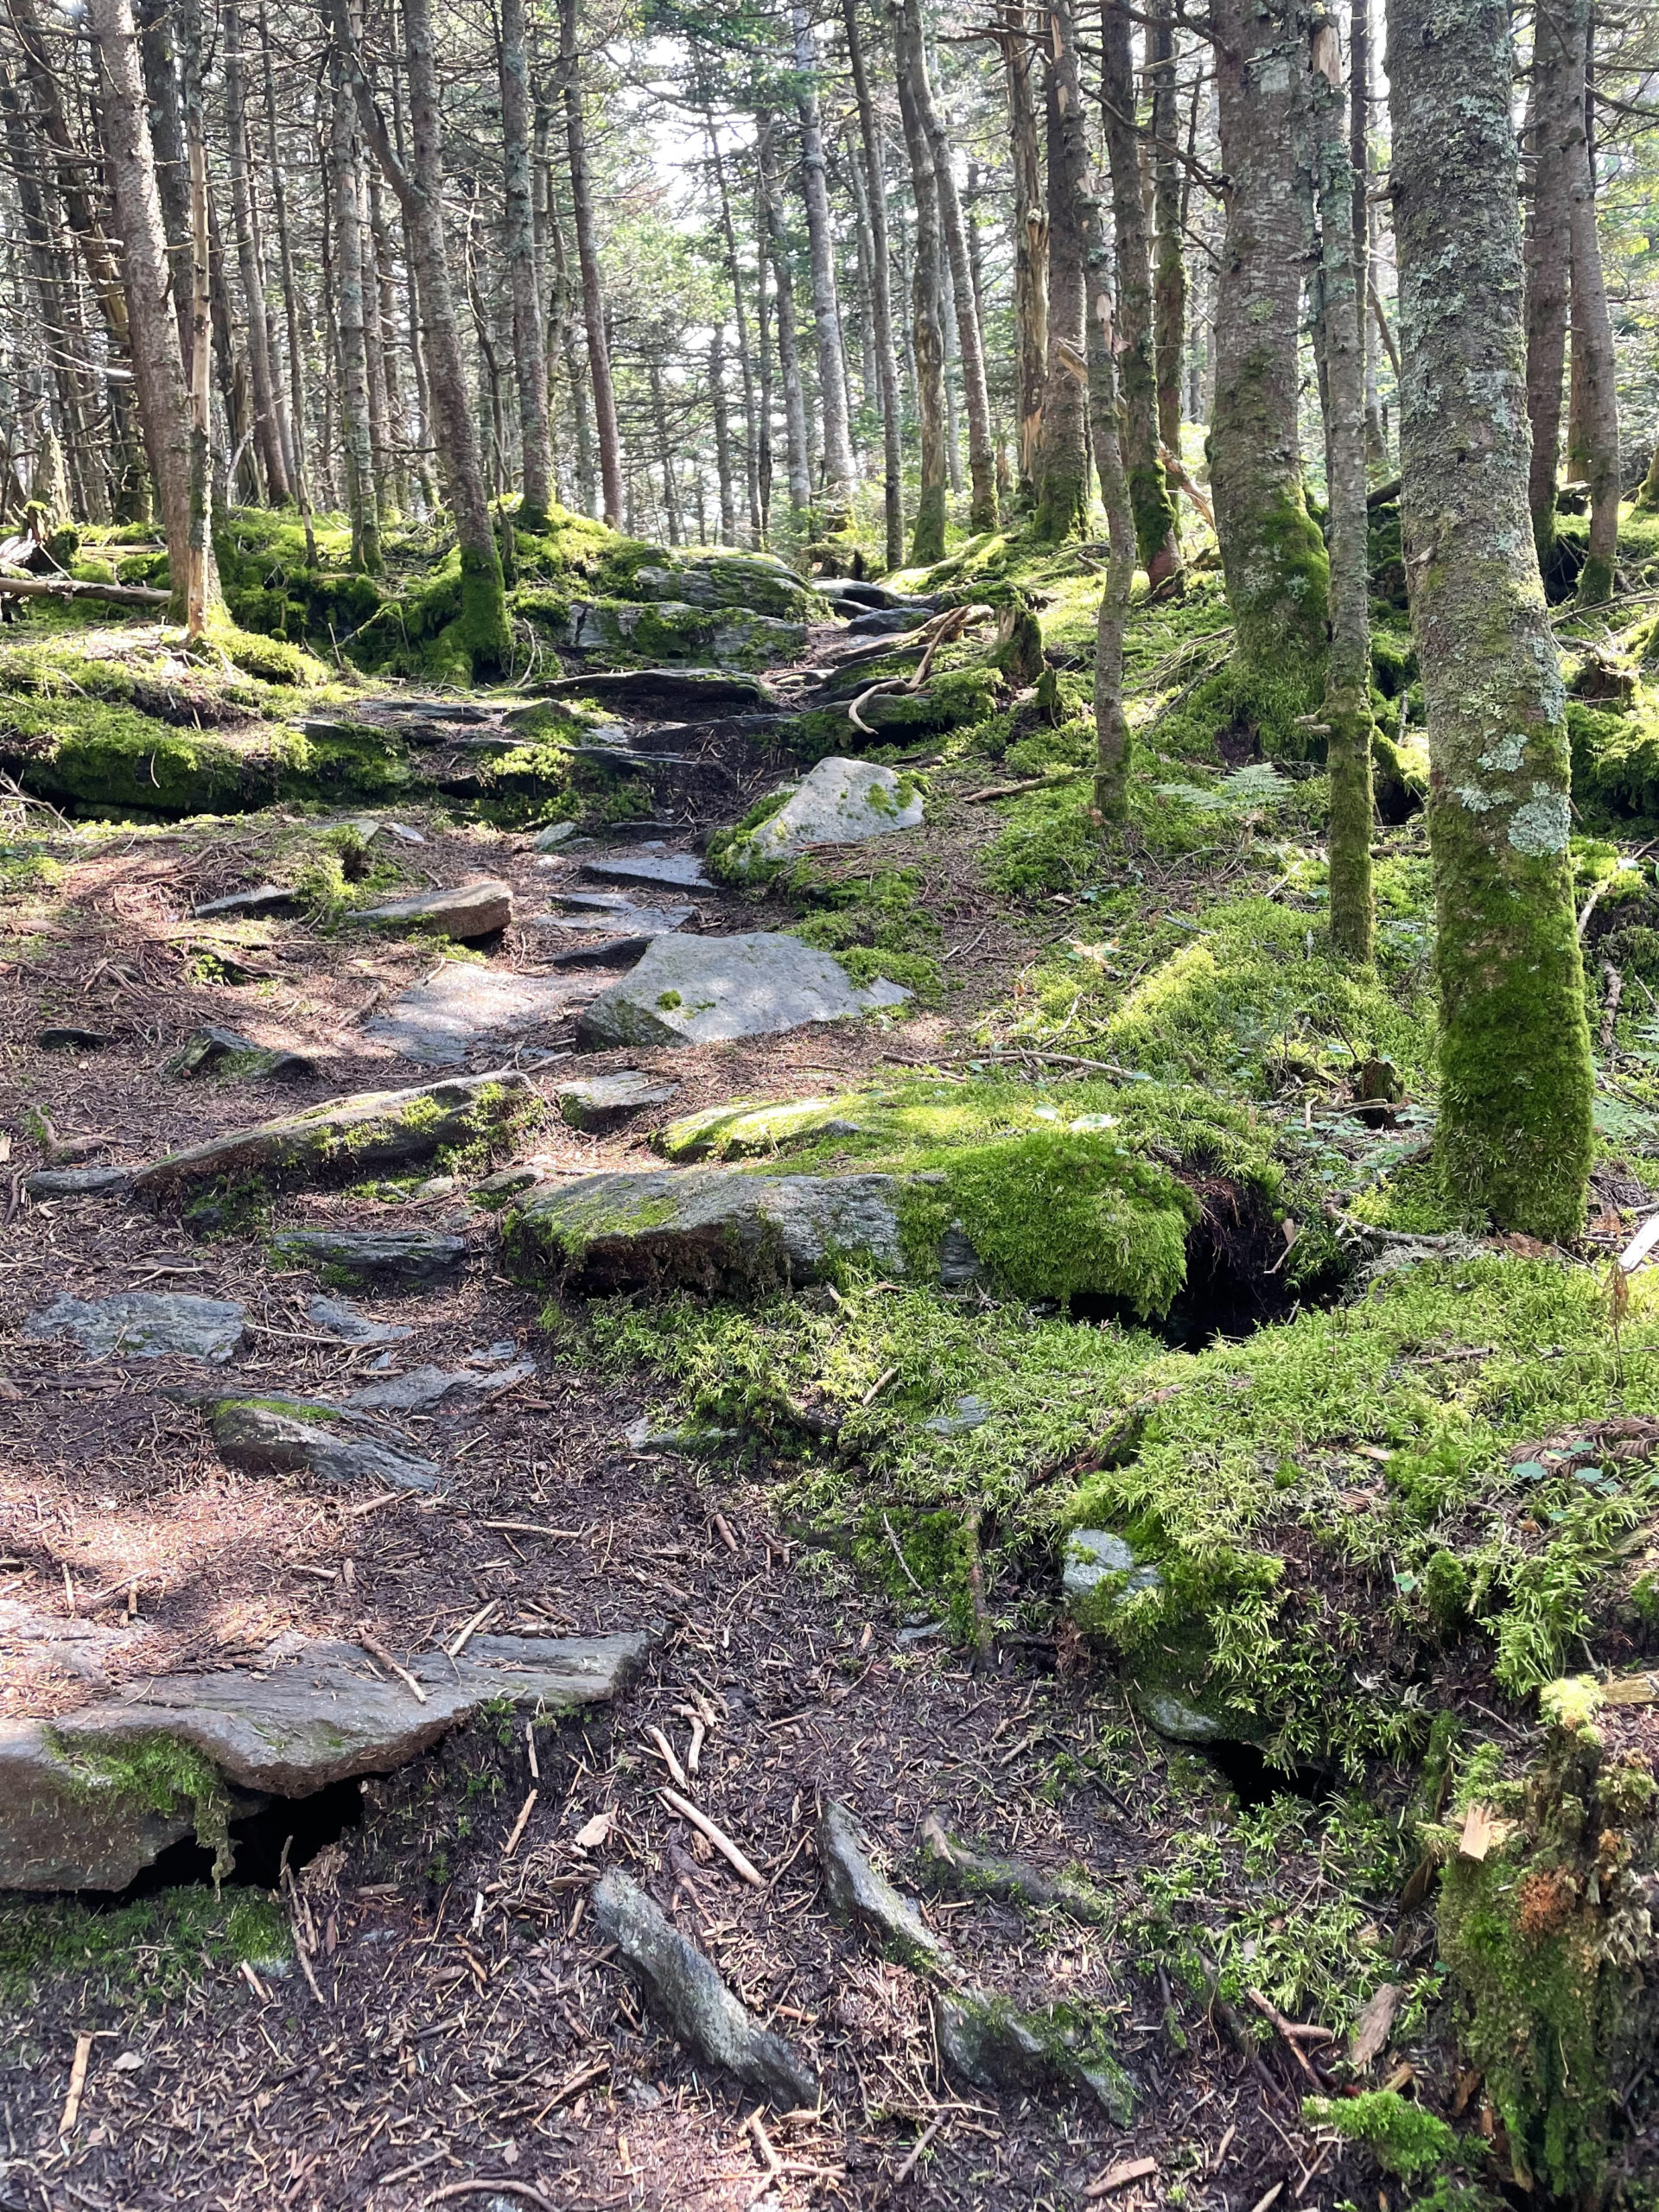 Rocks, roots, and moss, seen while hiking Mt Ellen and Mt Abraham, Green Mountains, Vermont